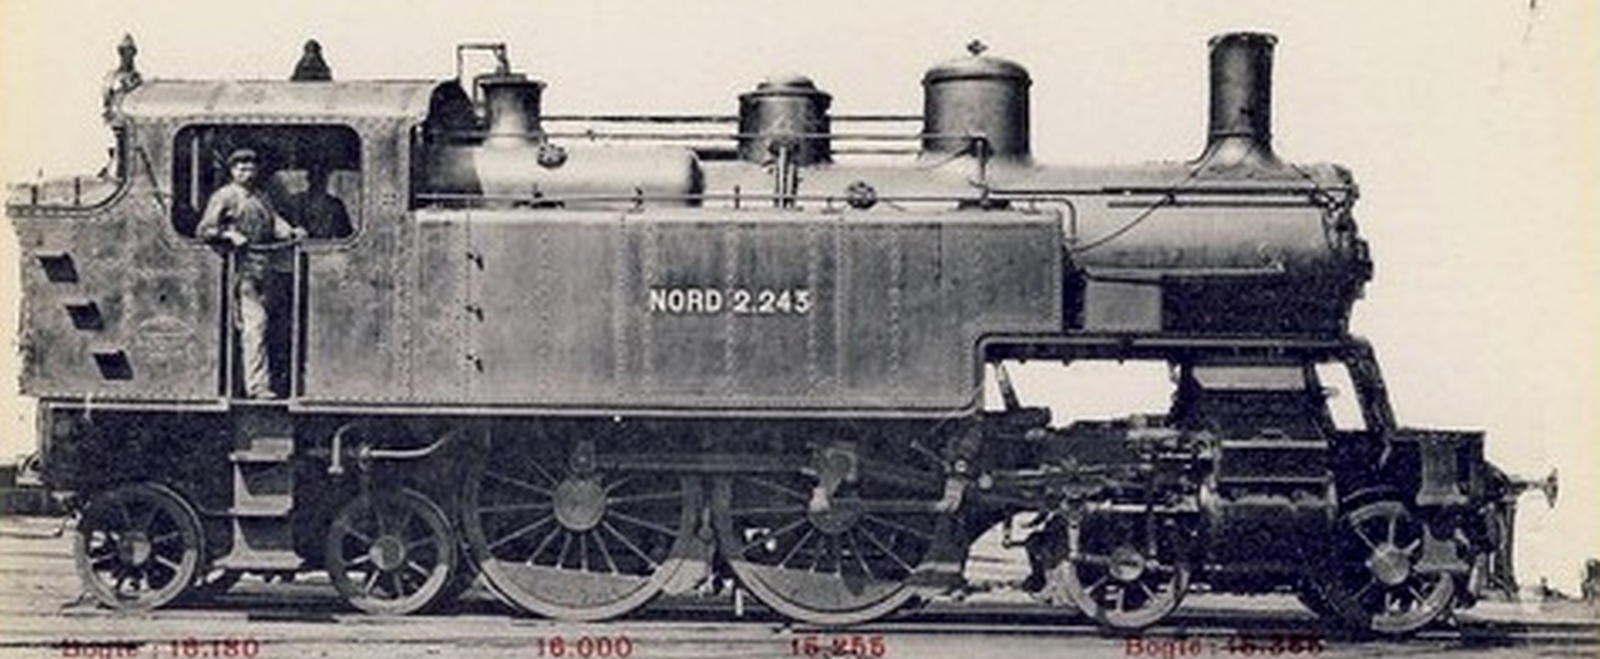 222 T 2.245 on an old postcard